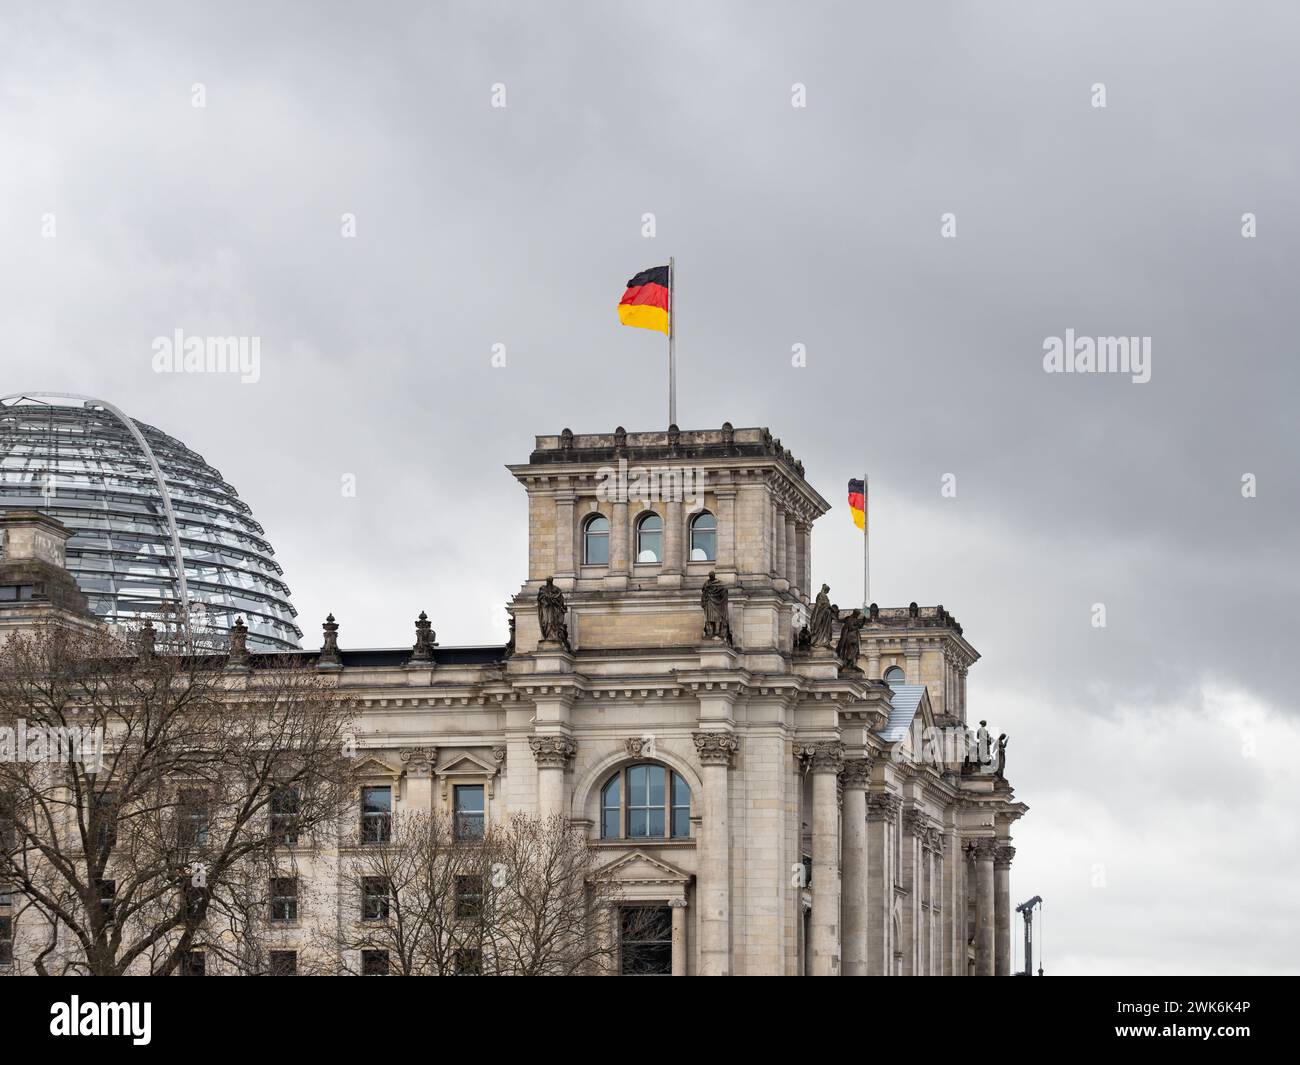 Reichstag building exterior with the German flag on the rooftop. The historical governmental house is a travel destination. The dark sky is dramatic. Stock Photo